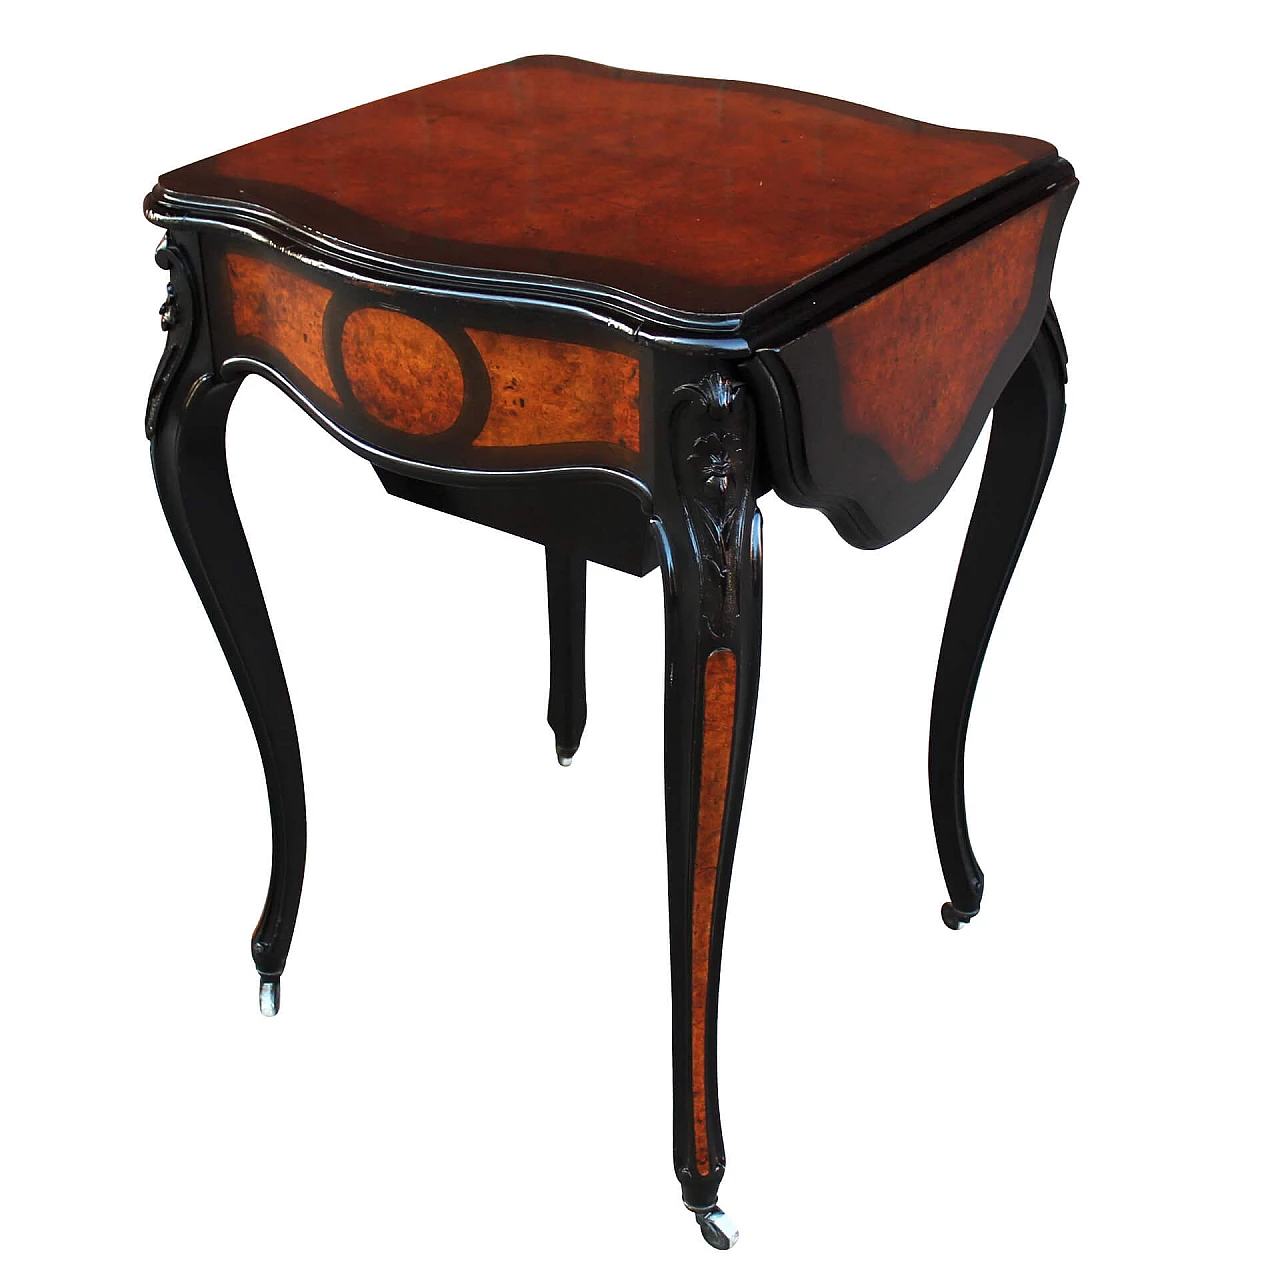 Napoleon III small table in ebony briar with compartment and side wings, 19th century 1250230